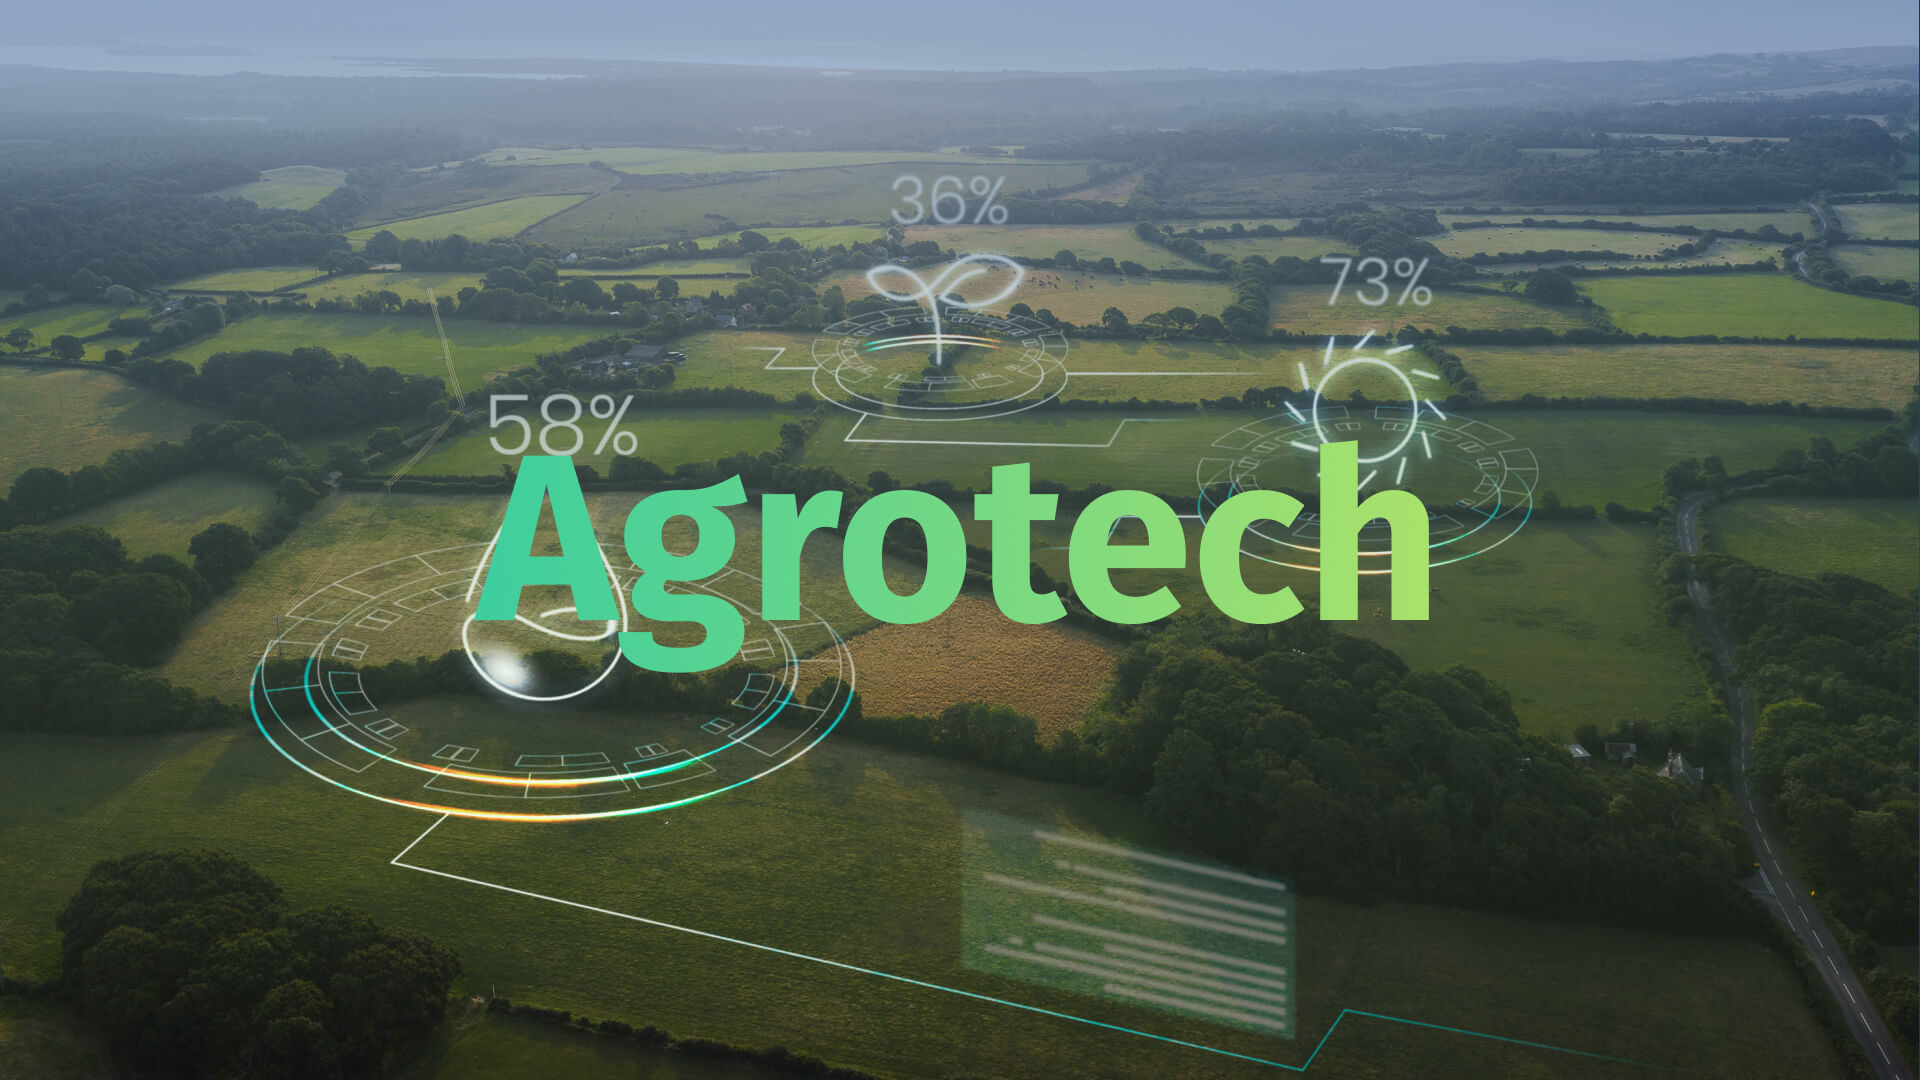 Agrotech transformacao digital na agricultura hero